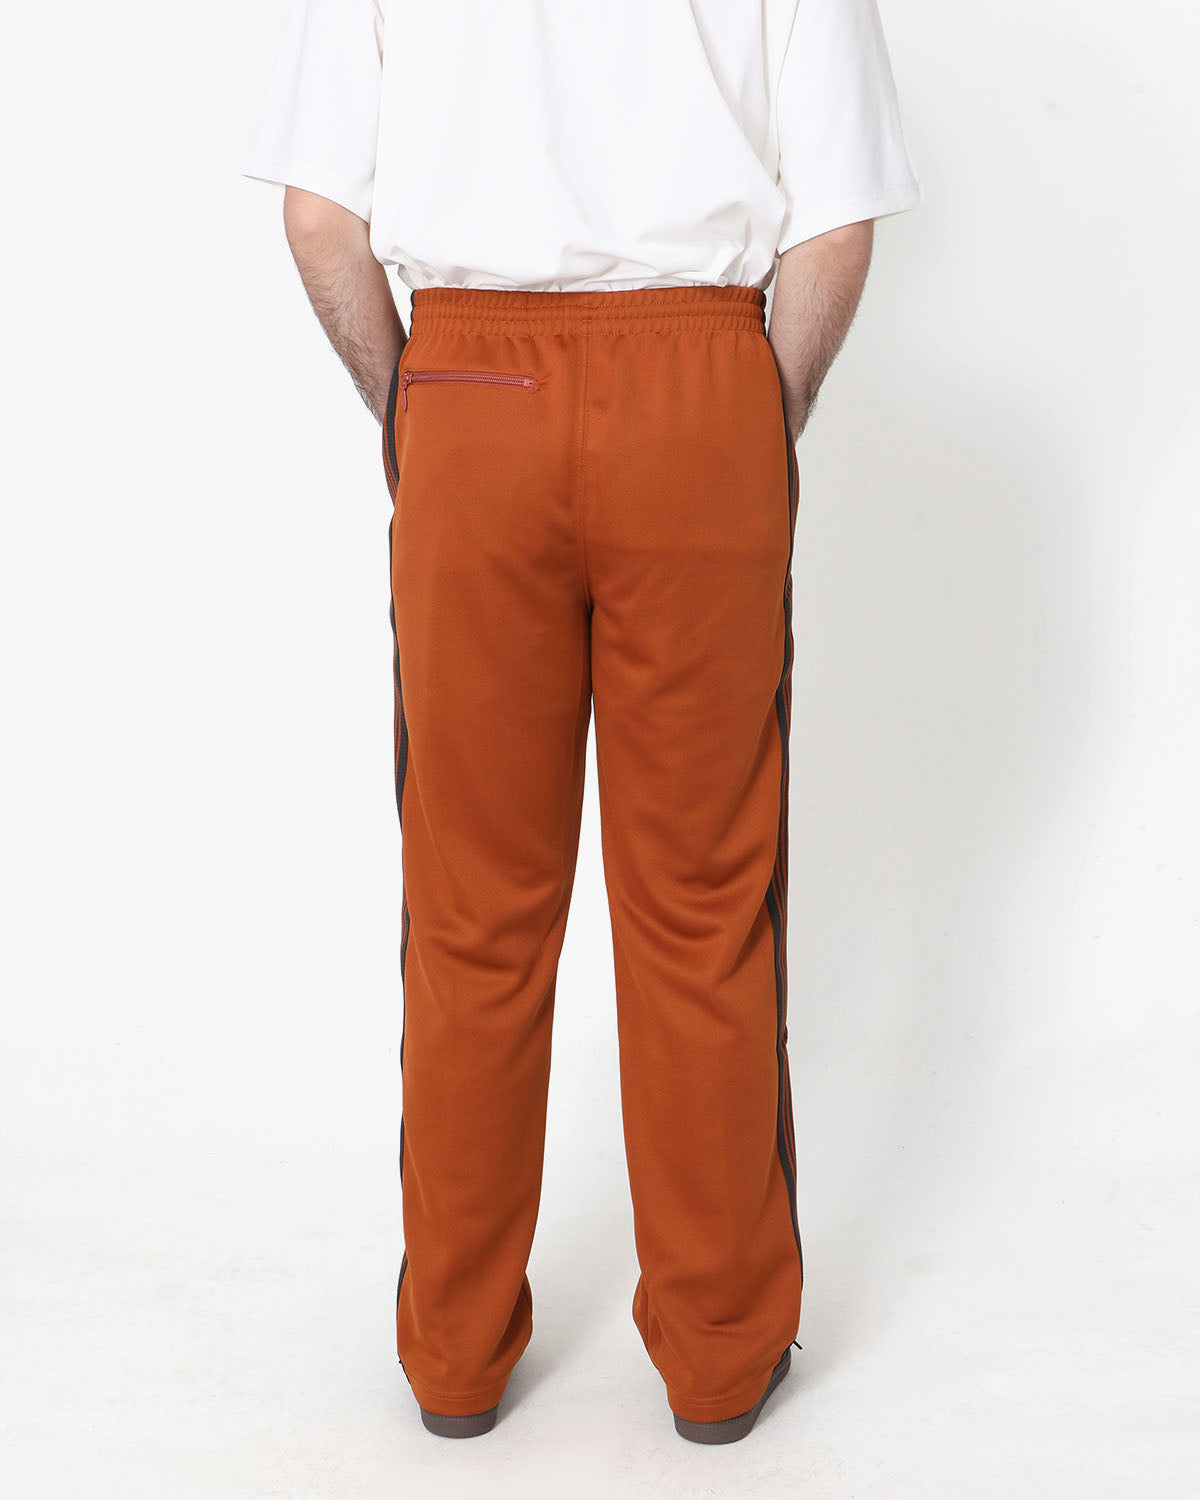 TRACK PANT - POLY SMOOTH